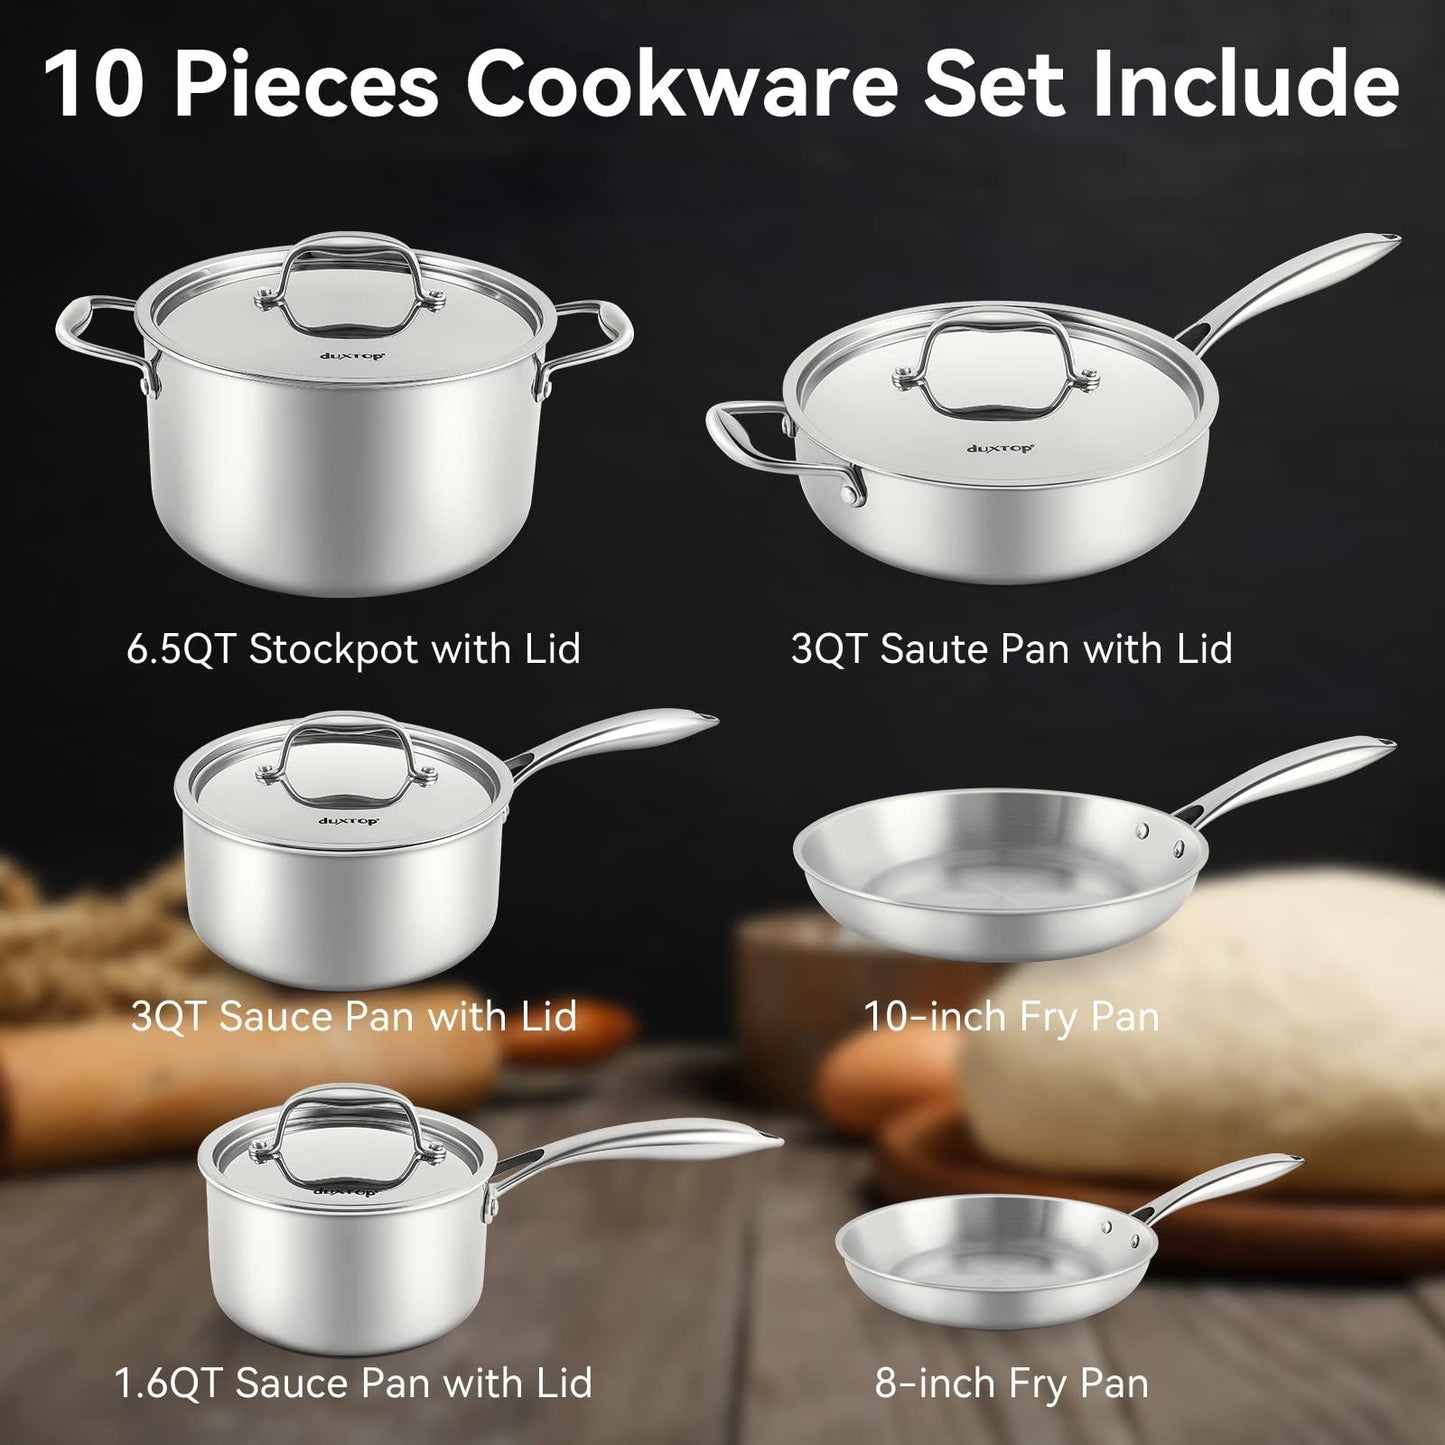 Duxtop Whole-Clad Tri-Ply Stainless Steel Induction Cookware Set, 10PC Kitchen Pots and Pans Set - CookCave